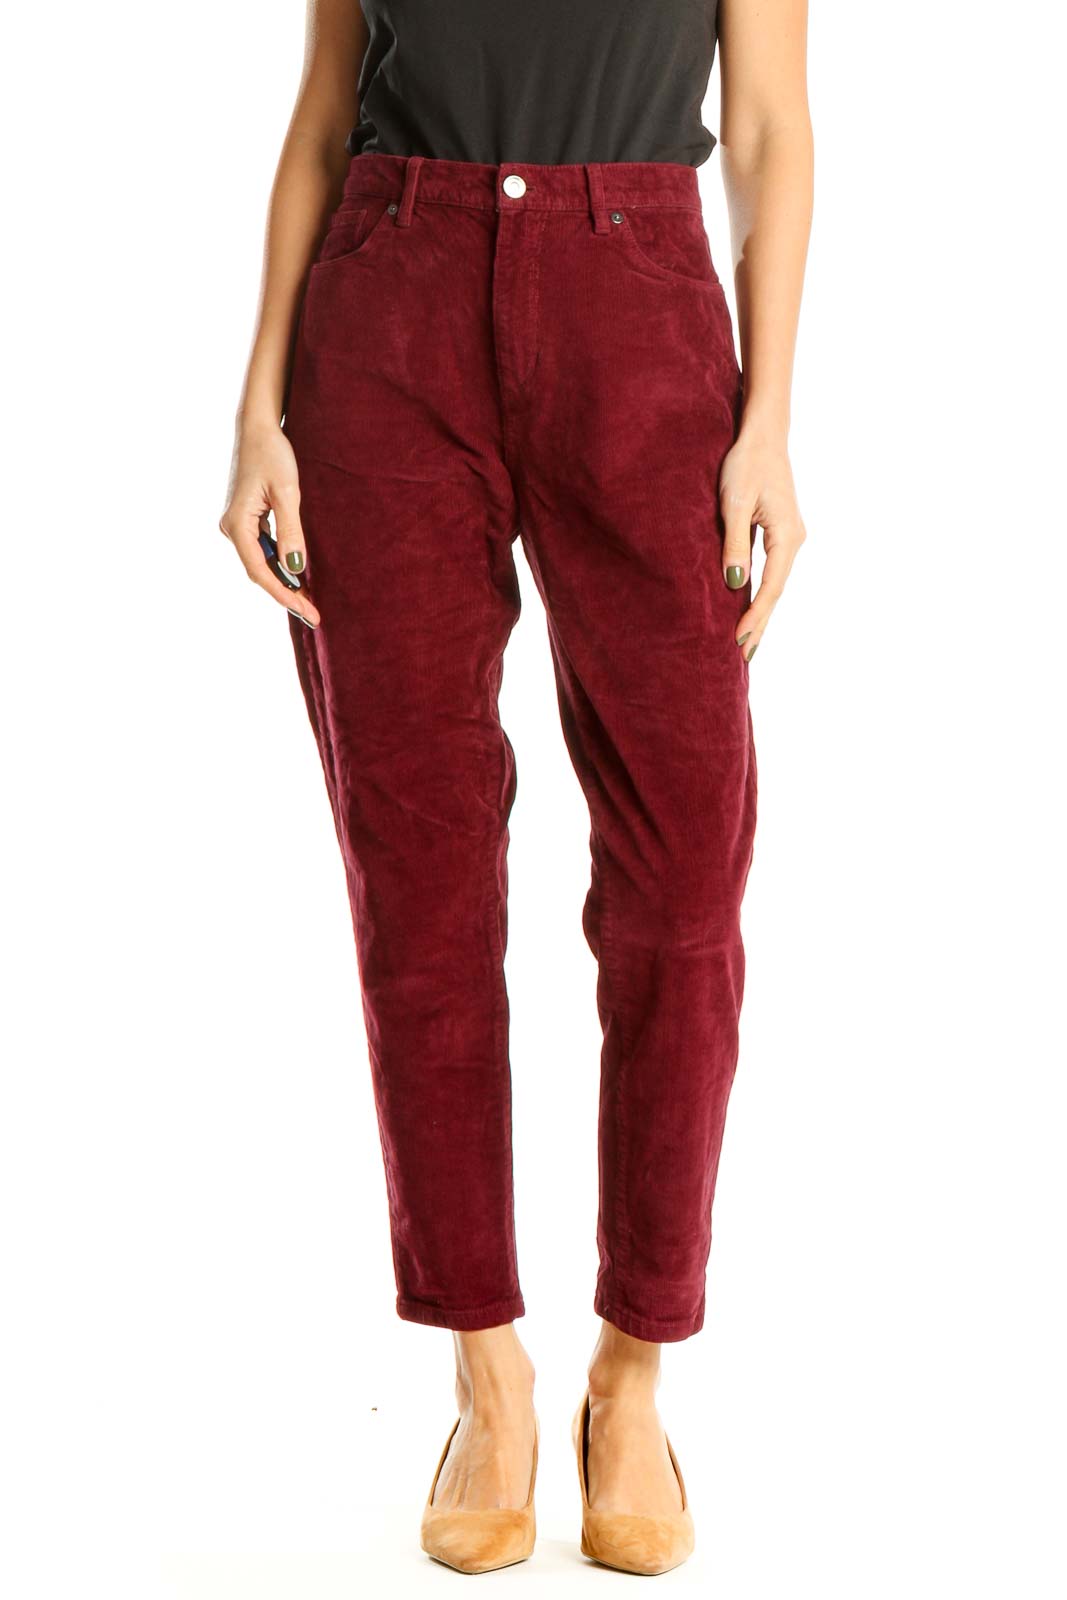 Red Casual Velour Pants Front